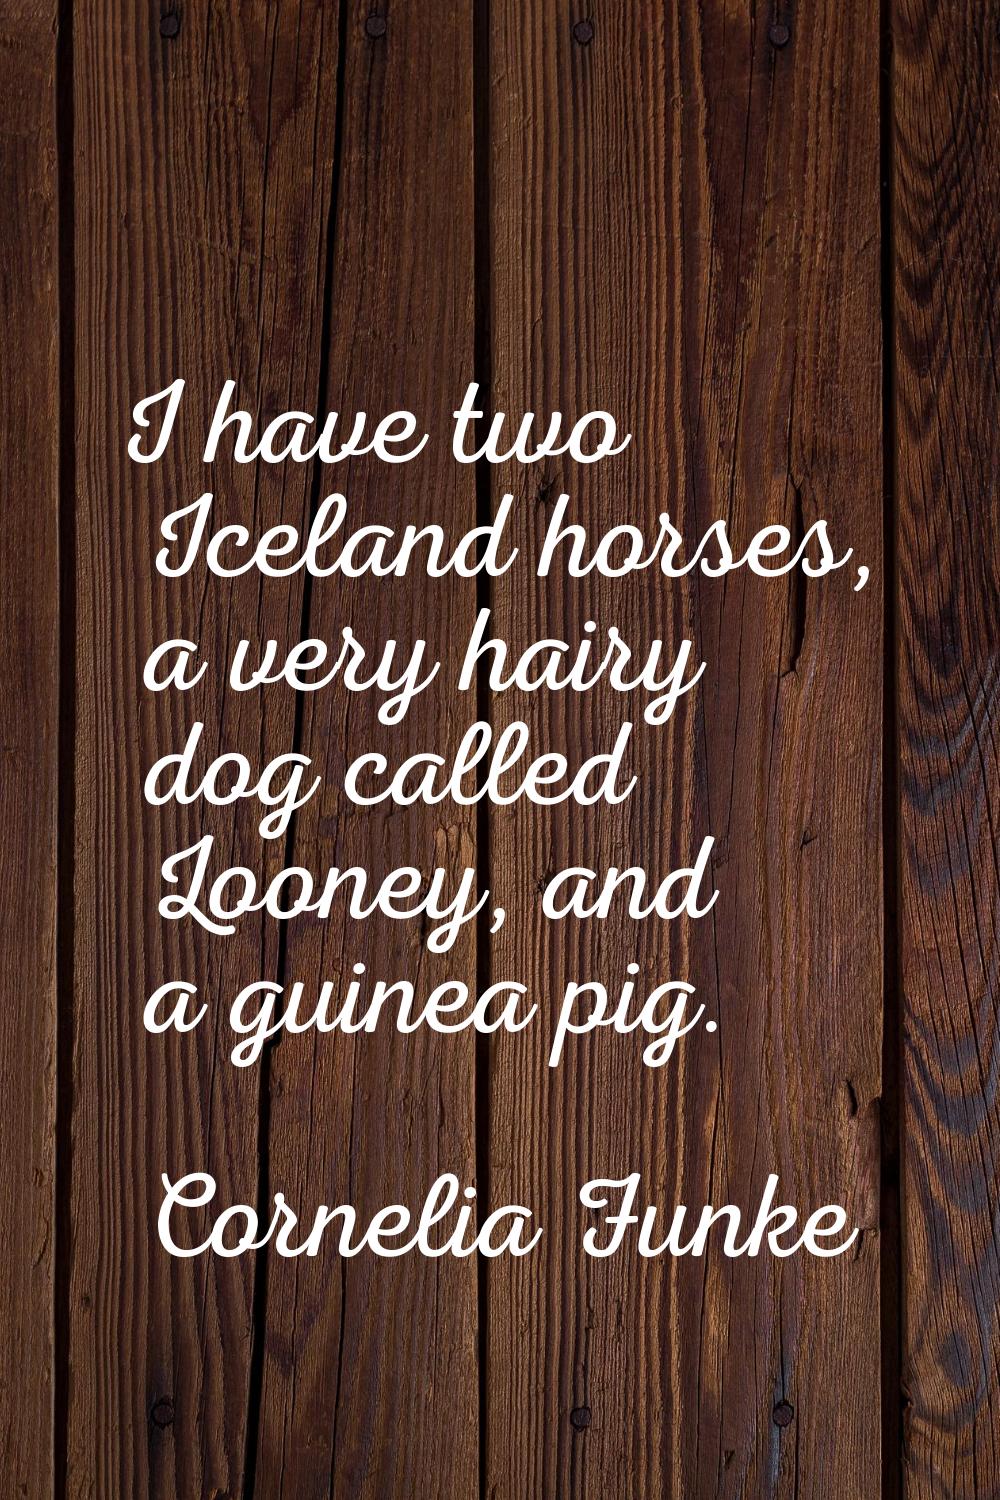 I have two Iceland horses, a very hairy dog called Looney, and a guinea pig.